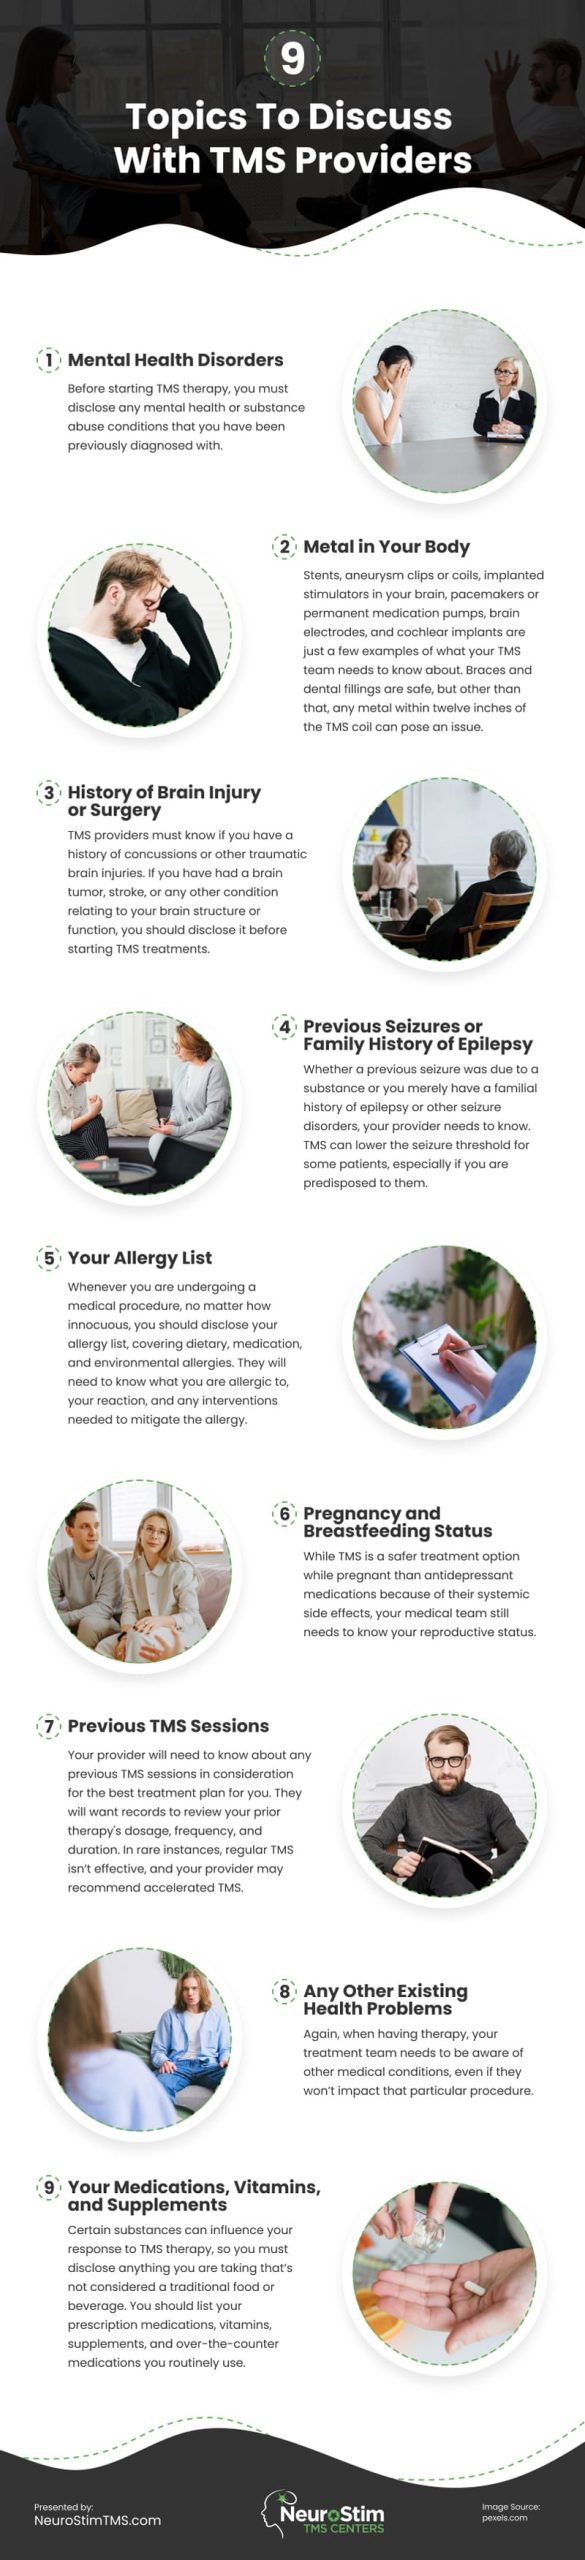 9 Topics To Discuss With TMS Providers Infographic